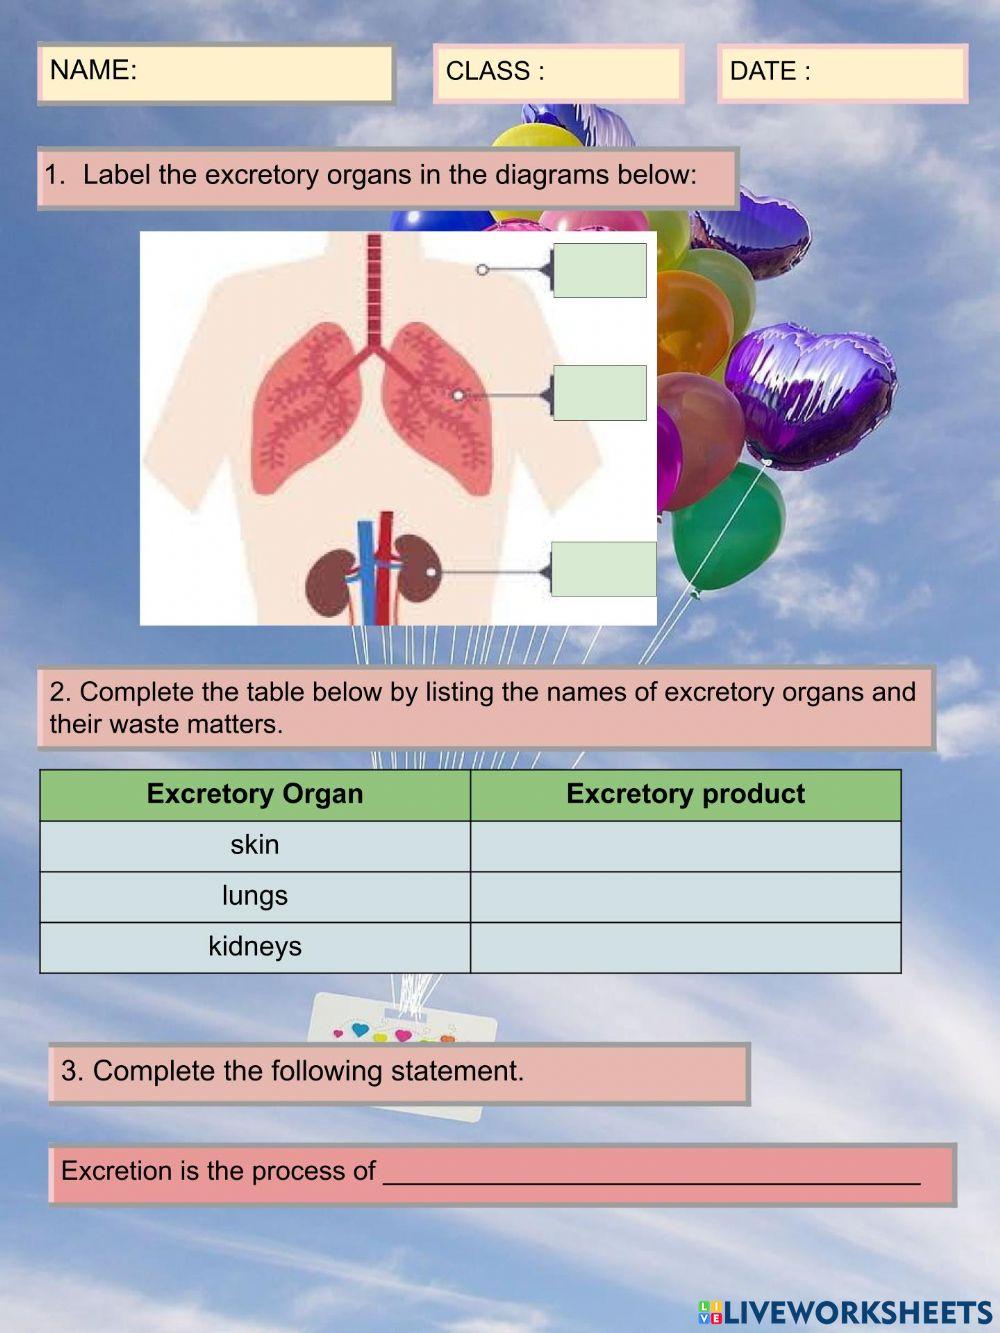 Organ and their products of excretion